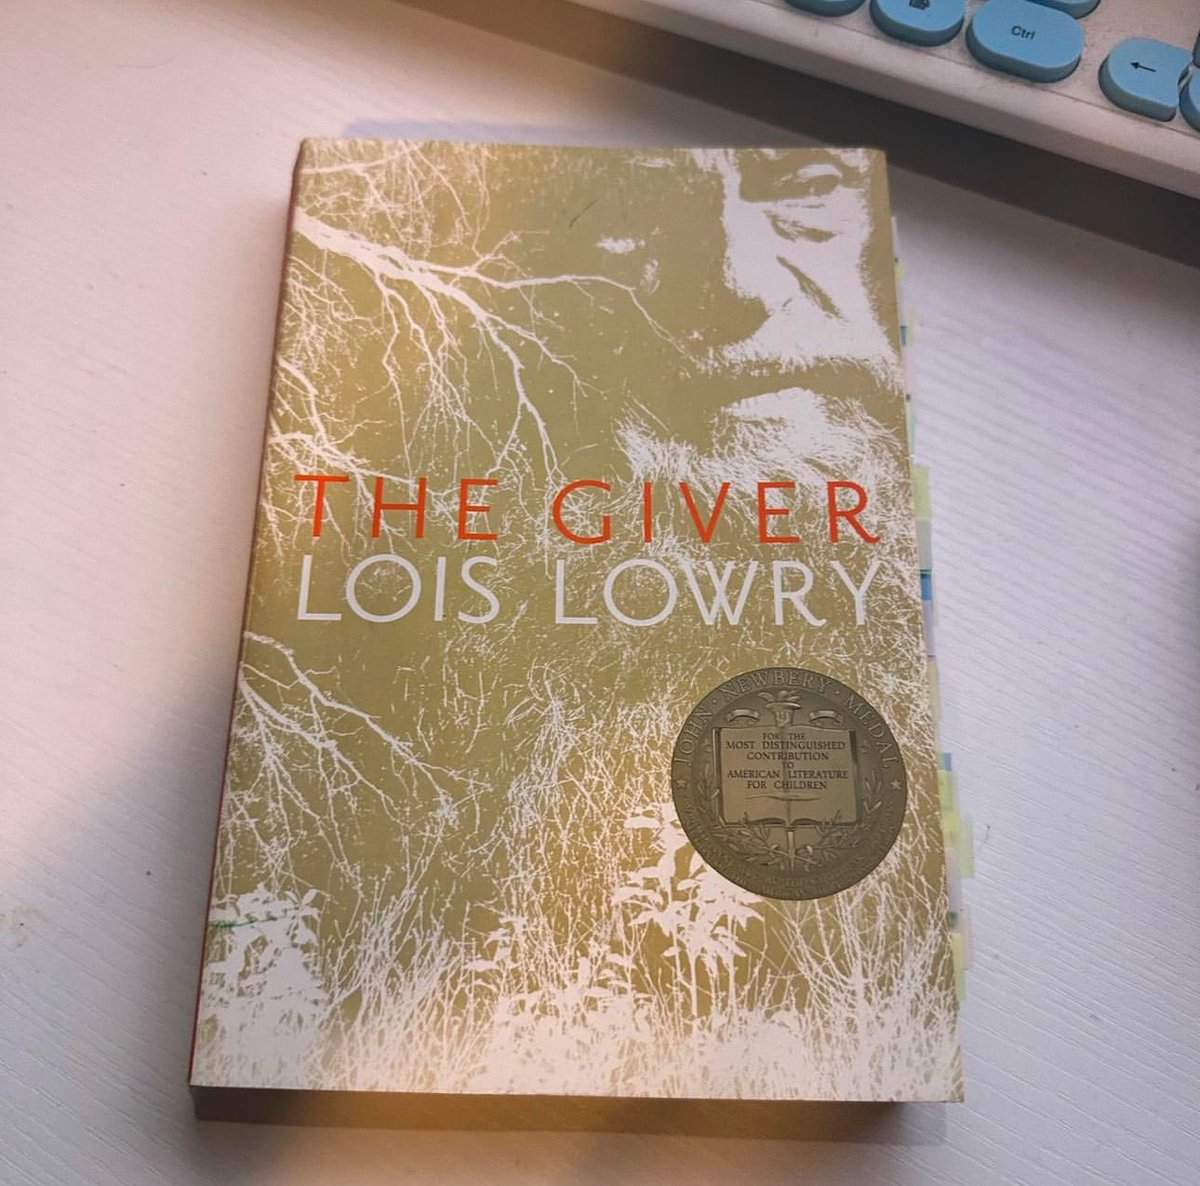 Growing up i the giver was and still is my favorite book it won me over when i had to read it back in middle school for an assignment

#book #read #readersofinsta #booksofinstagram #bookworm #booksofinsta #readersofig #literature #bookish #bookphotography
#bookaesthetic